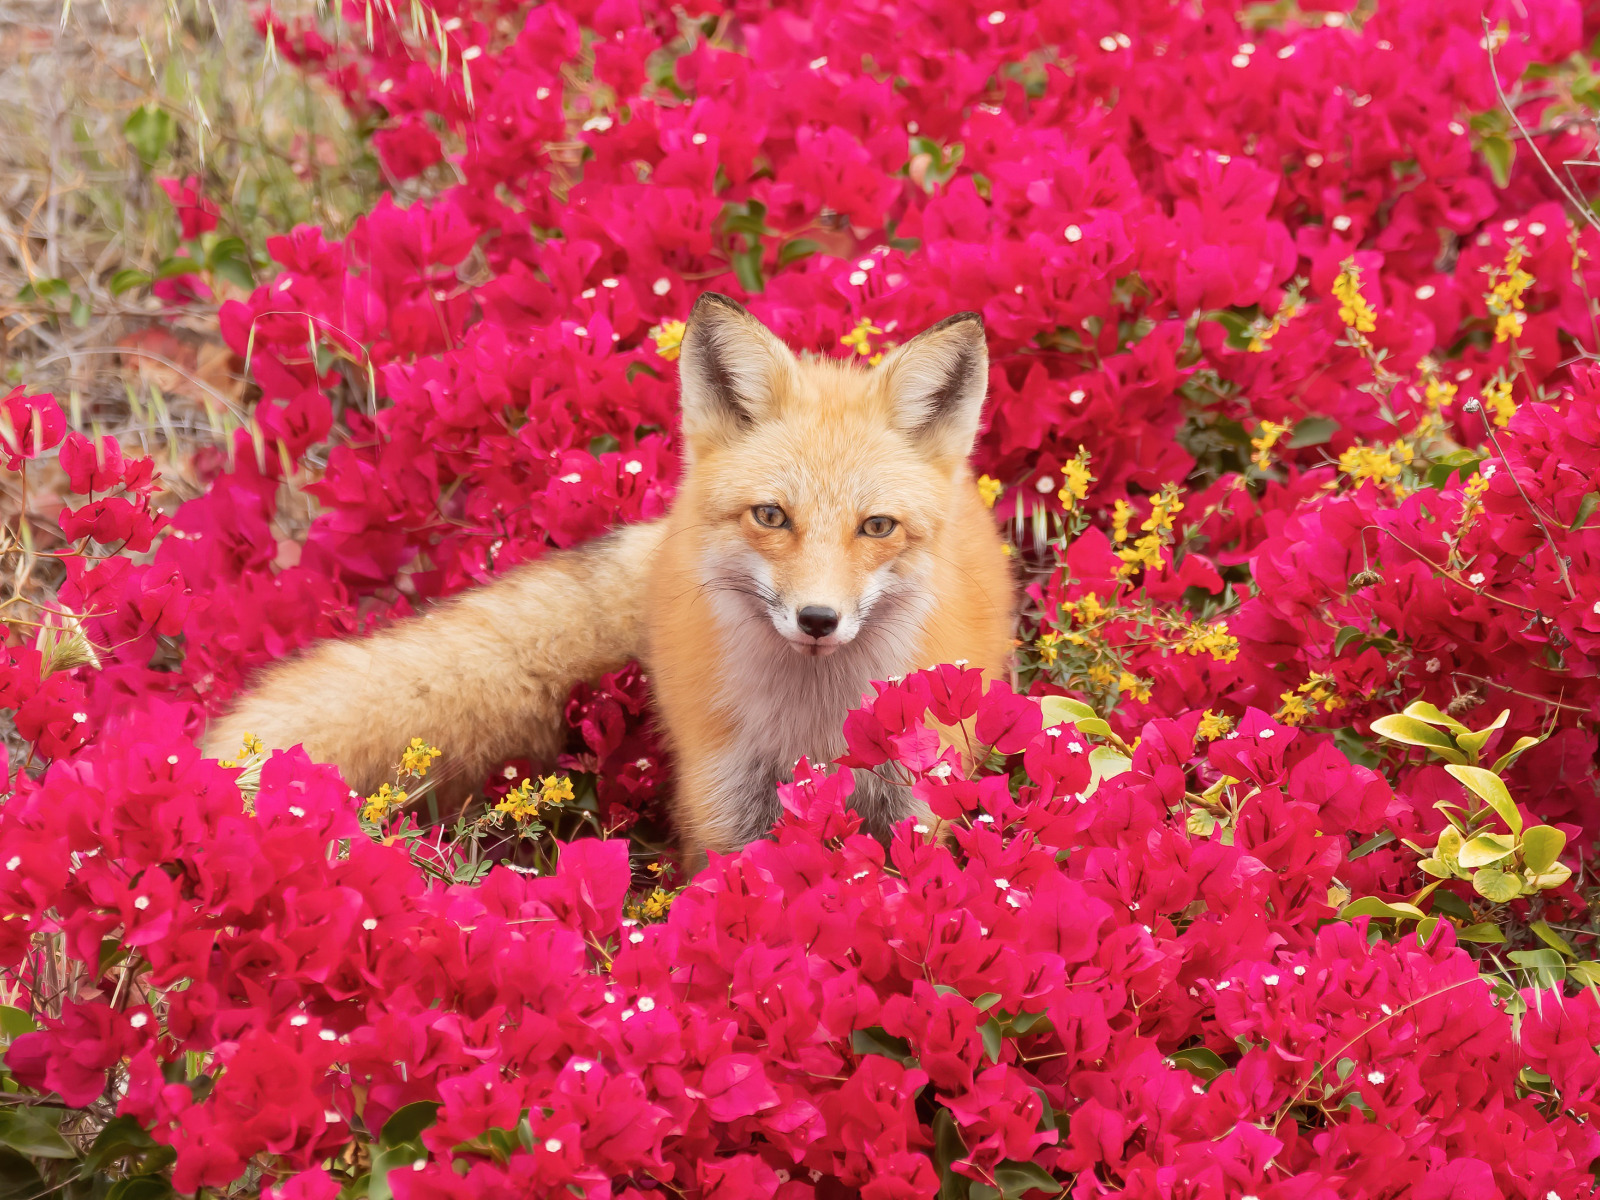 Flower foxes